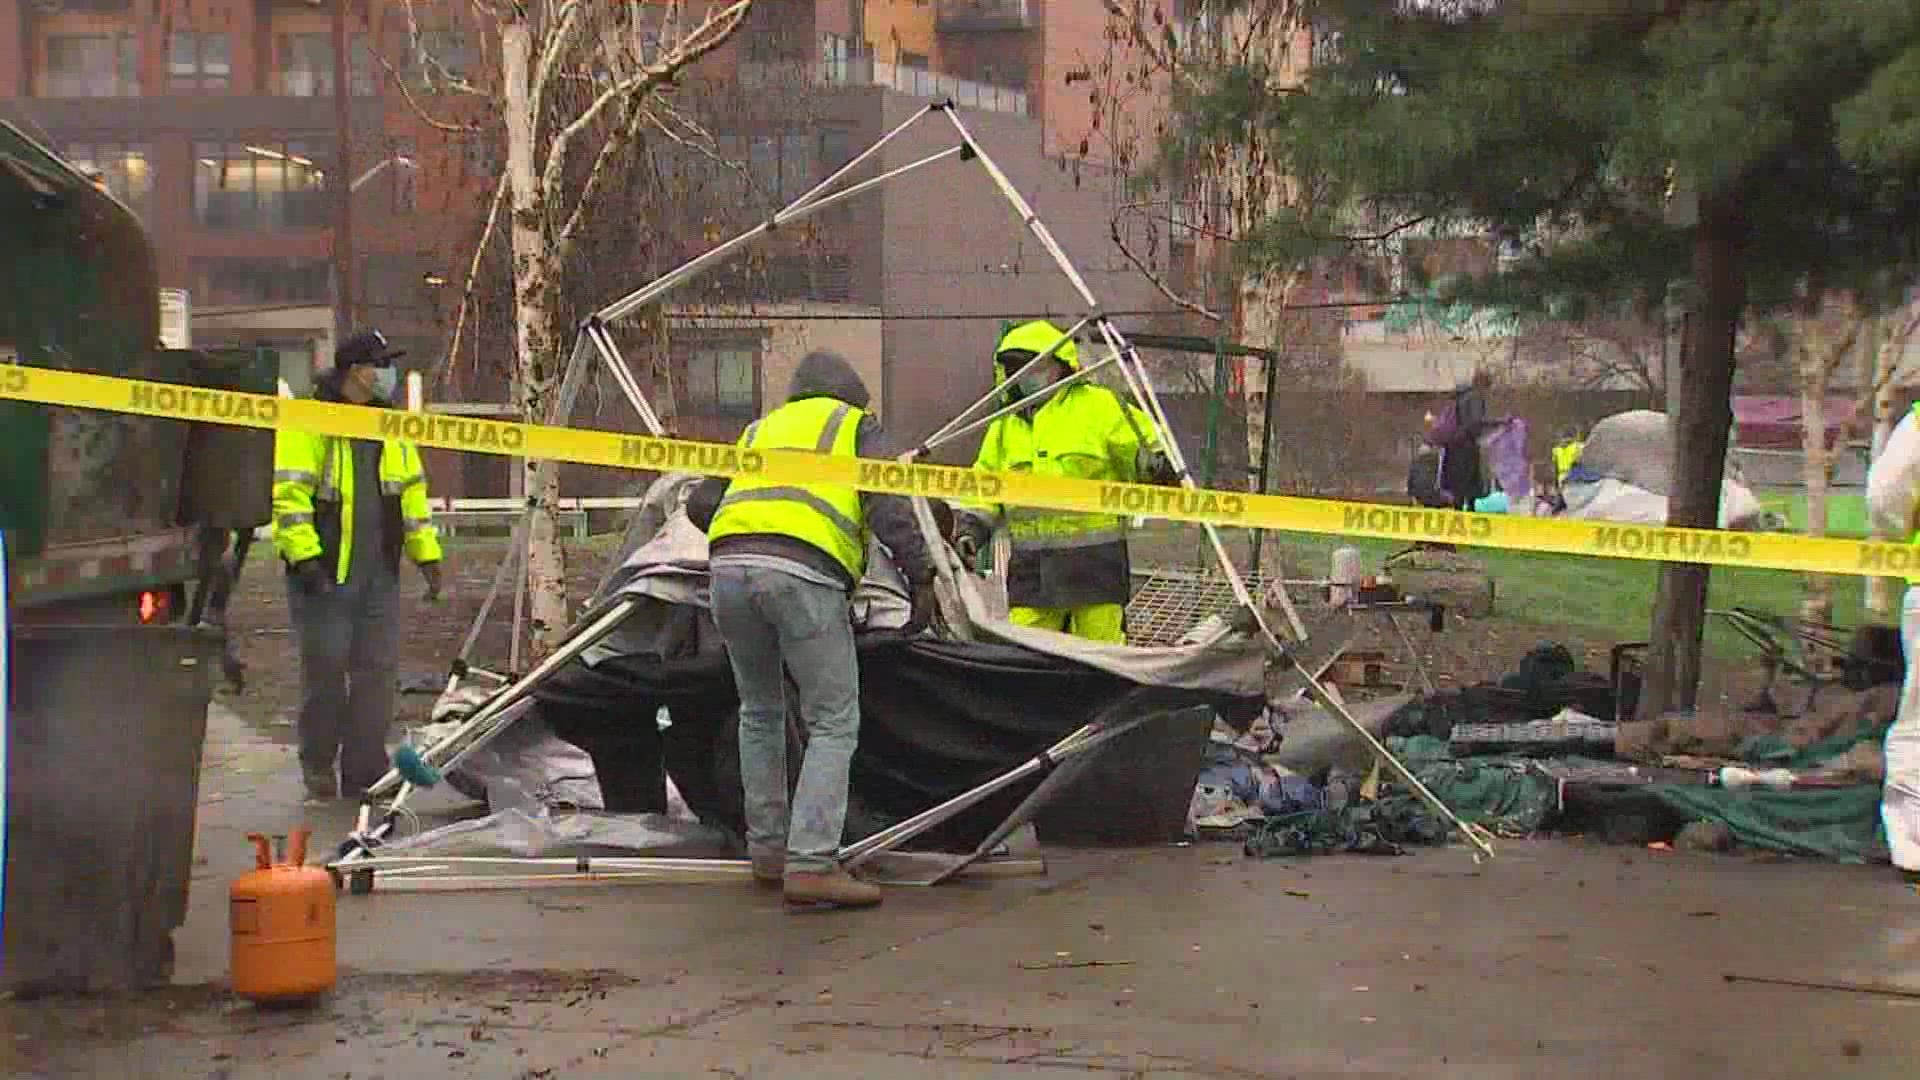 City workers cleared out a hazardous homeless camp in Seattle's Ballard neighborhood Tuesday morning